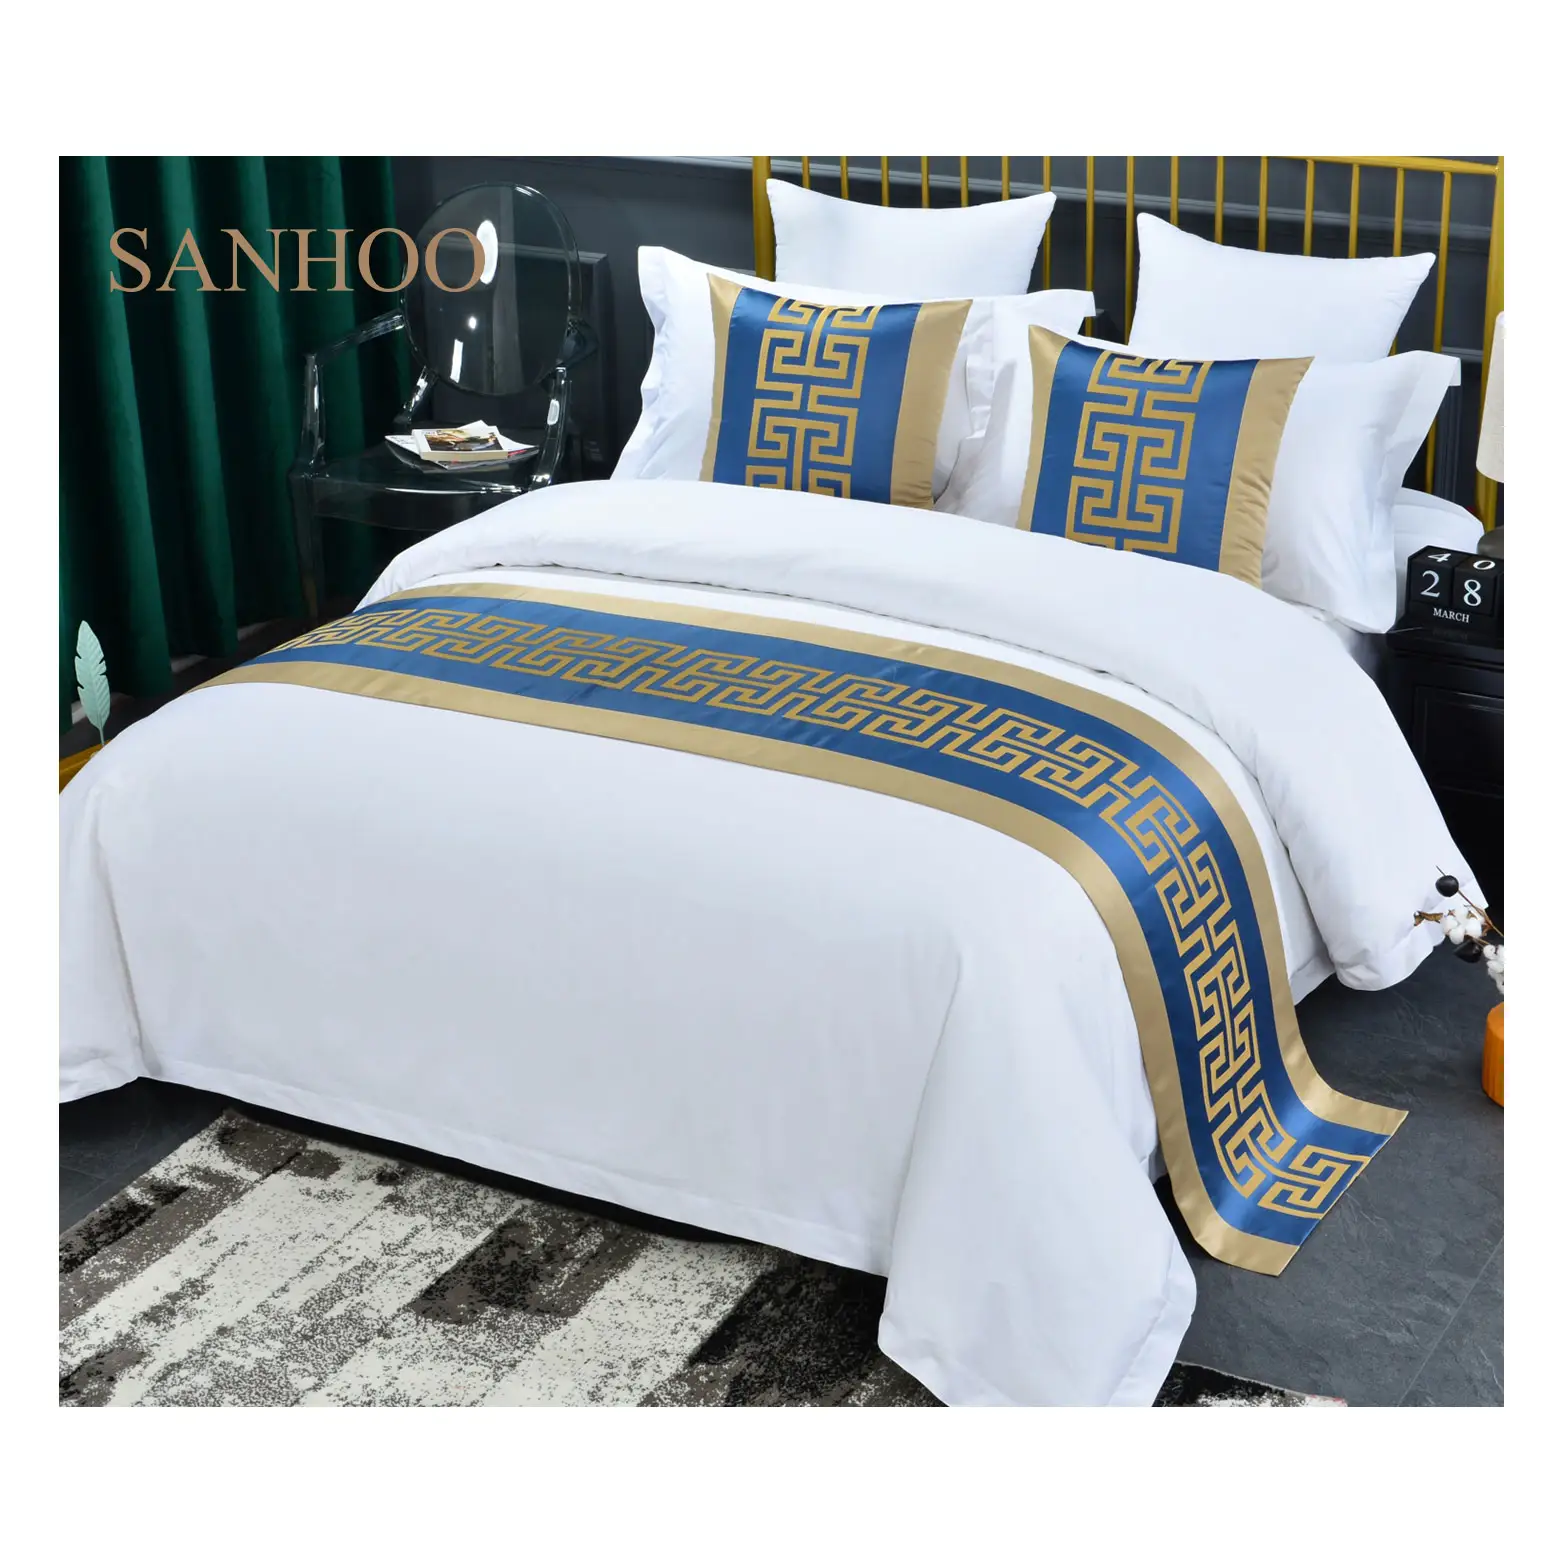 SANHOO Luxury Hotel Customized Embroidery Bed Cover Plain Bed Runner with Matching Pillow Cover